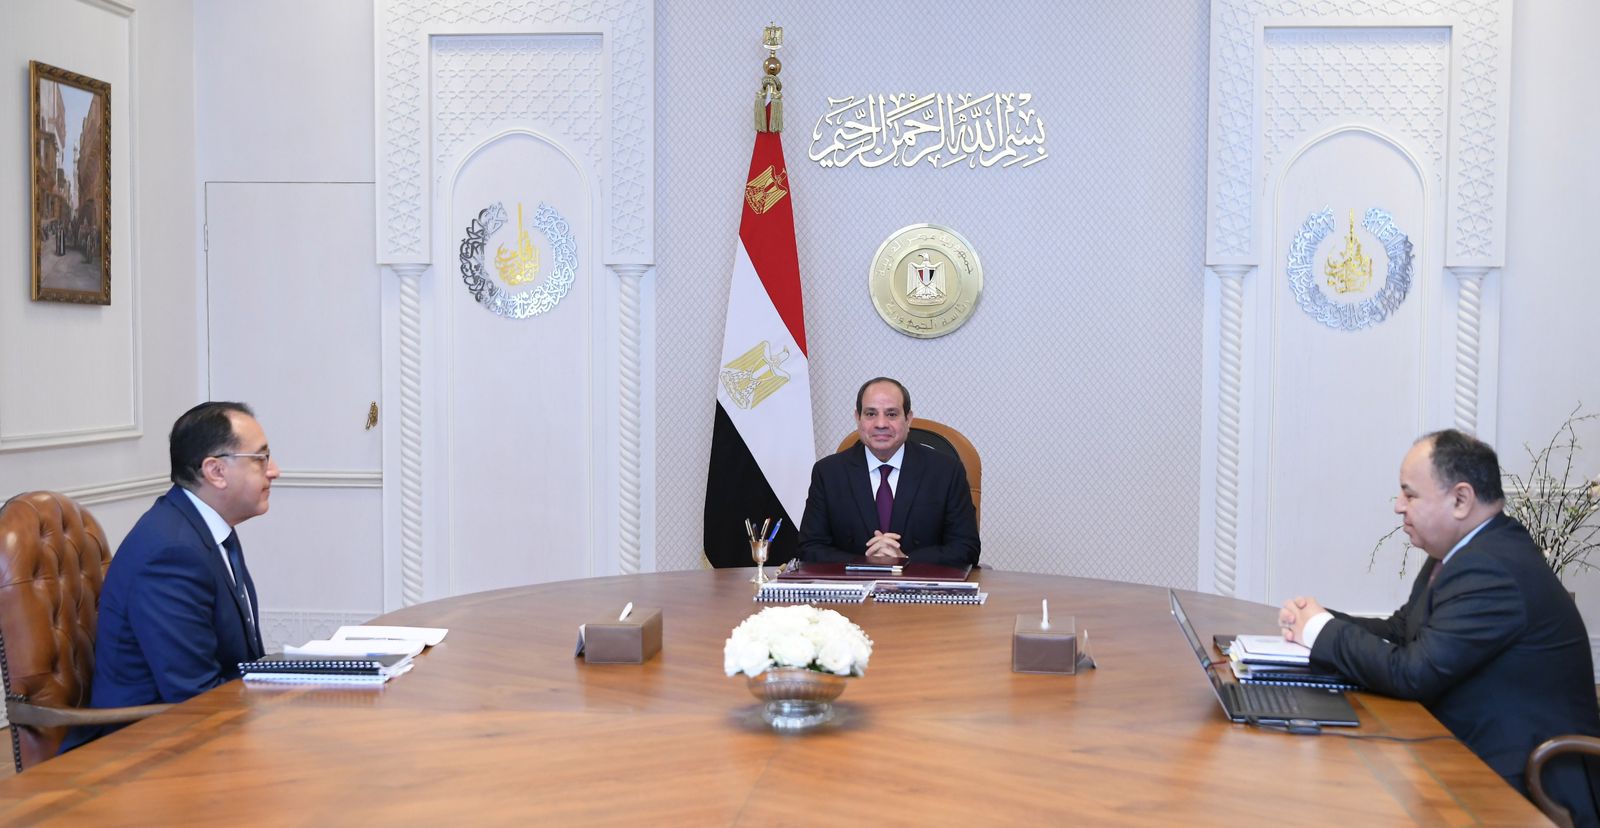 The Minister of Finance reviews to President Sisi the ongoing efforts to achieve the budget targets